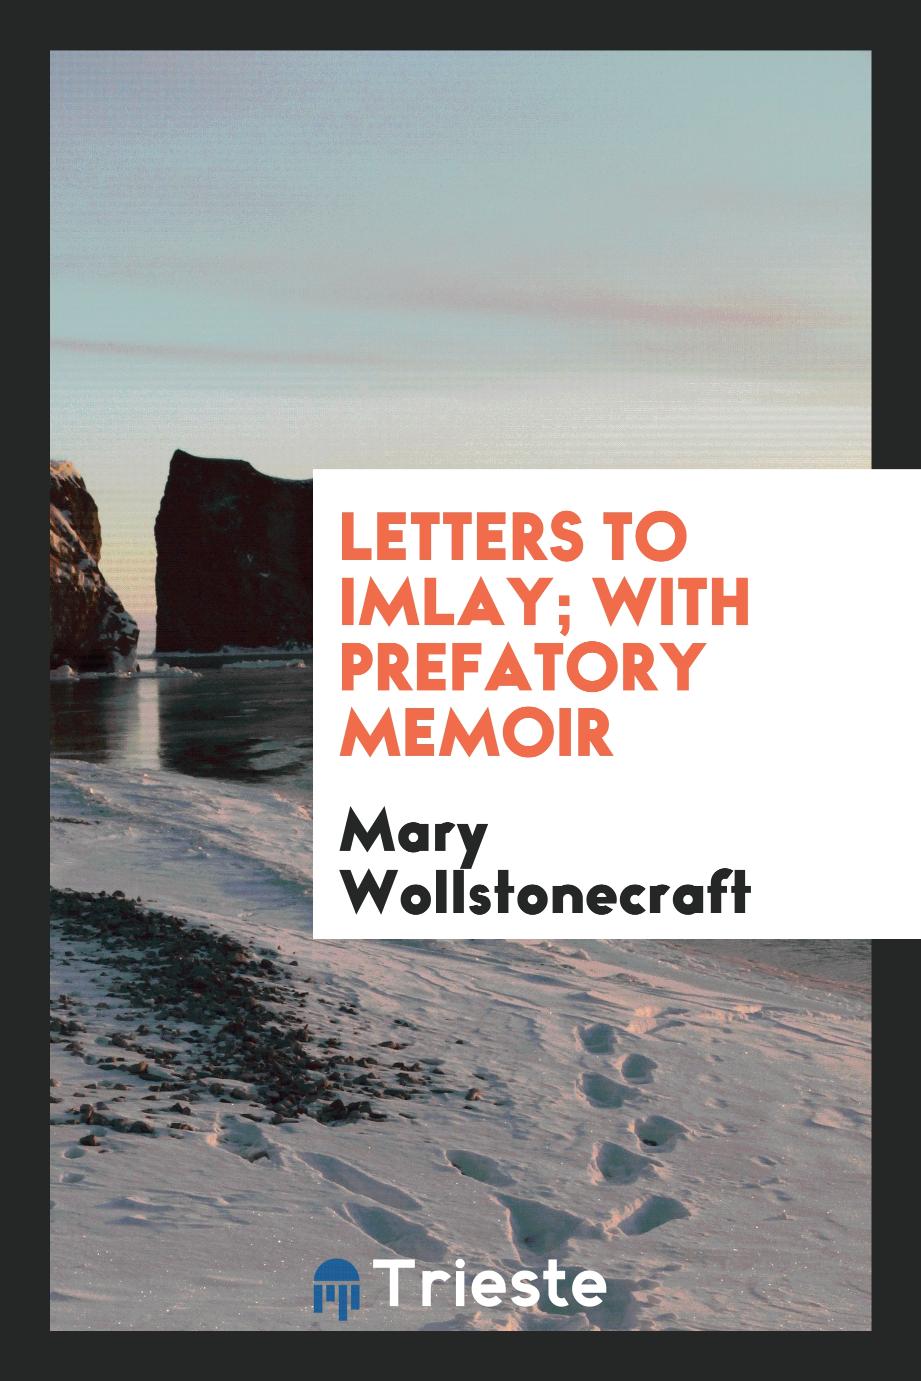 Letters to Imlay; with prefatory memoir